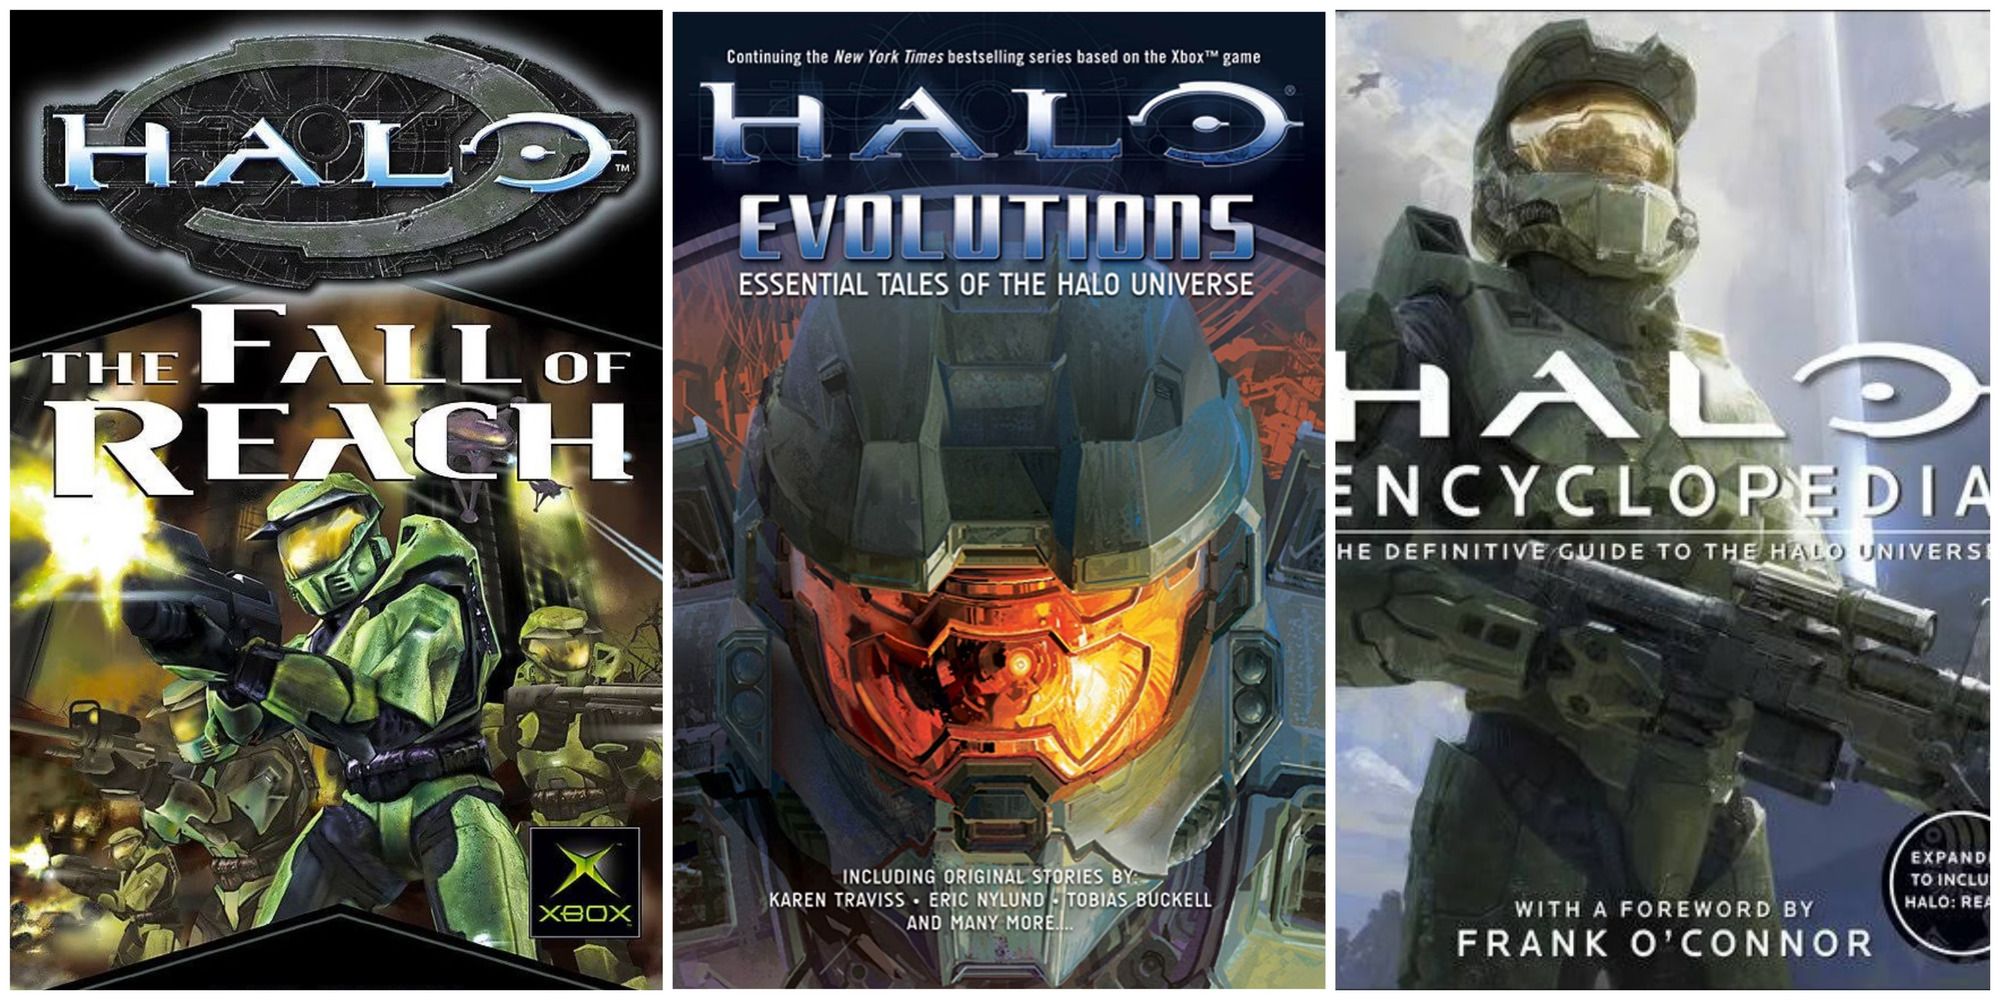 The Fall of Reach, Evolutions, and Encyclopedia.